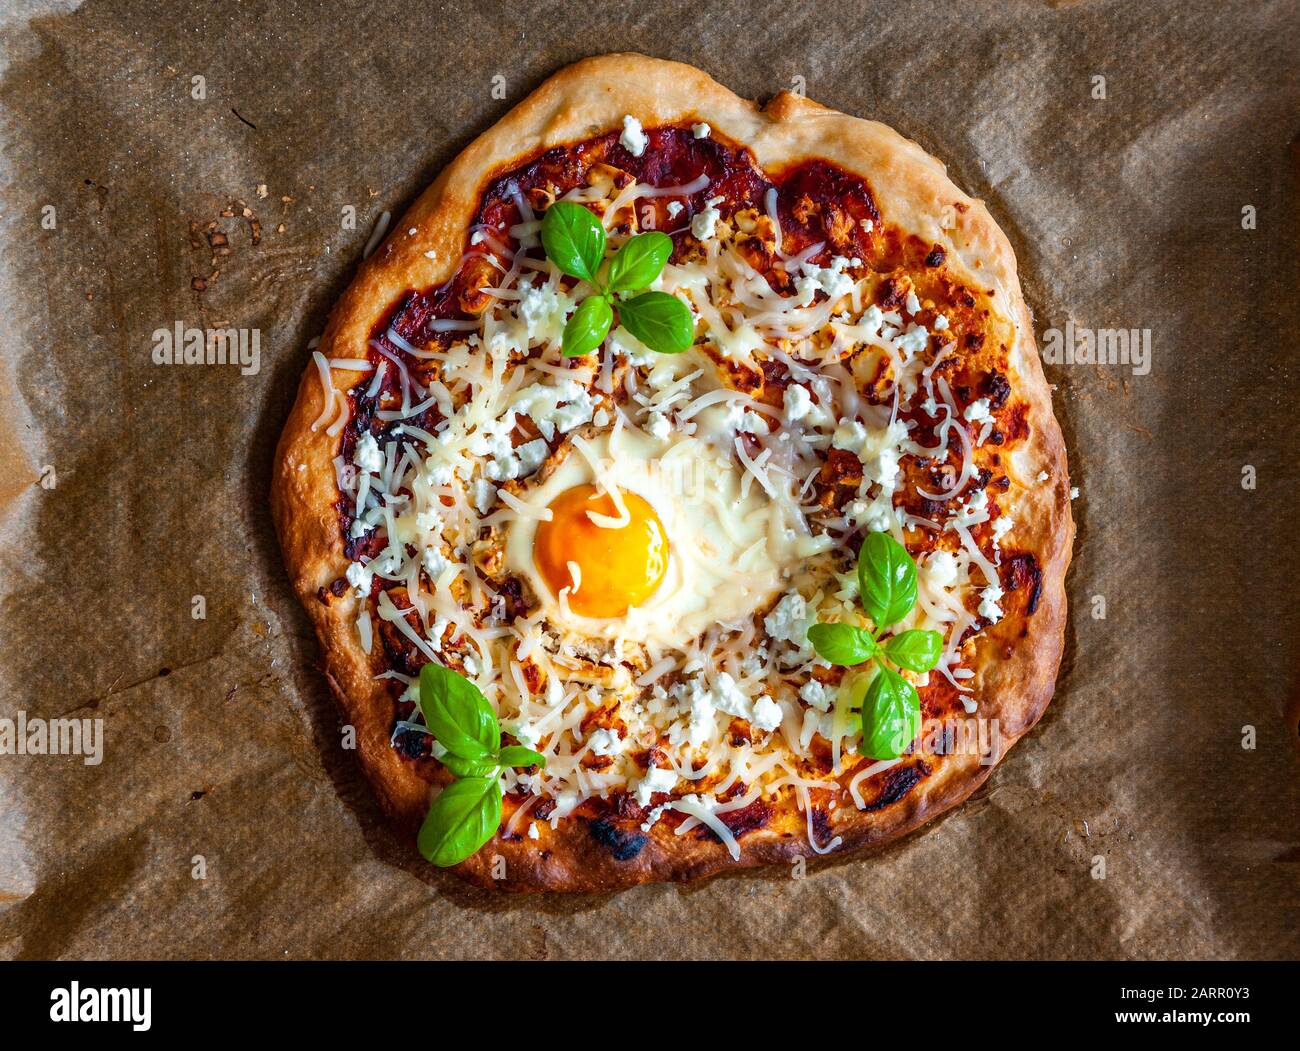 Overhead shot of a pizza with egg, cheese and herbs. Rustic scene and dramatic light. Stock Photo